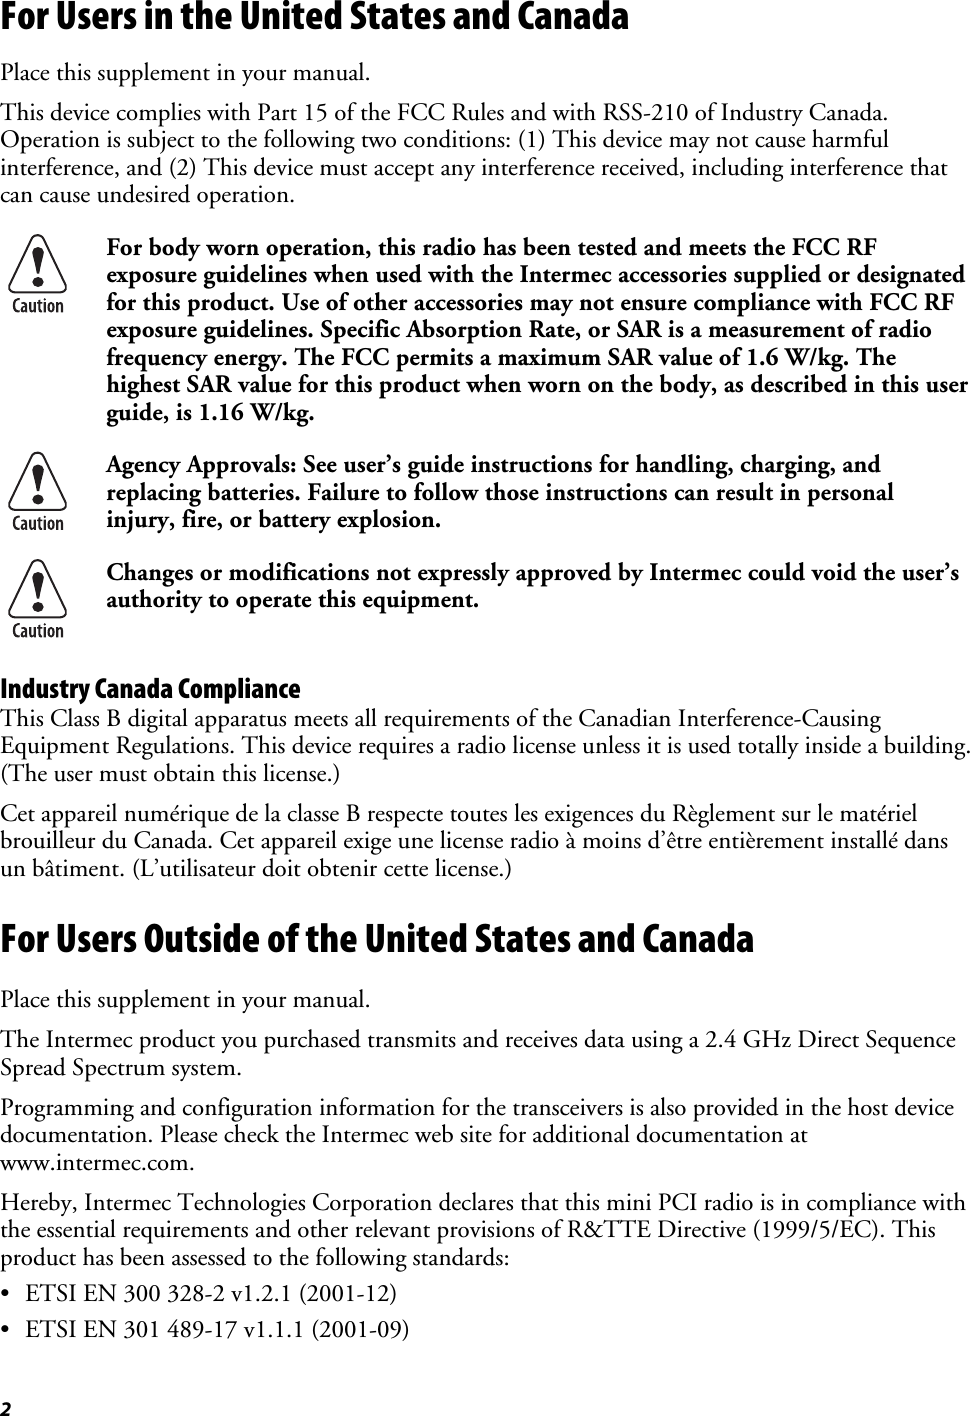 2   For Users in the United States and Canada Place this supplement in your manual. This device complies with Part 15 of the FCC Rules and with RSS-210 of Industry Canada. Operation is subject to the following two conditions: (1) This device may not cause harmful interference, and (2) This device must accept any interference received, including interference that can cause undesired operation.  For body worn operation, this radio has been tested and meets the FCC RF exposure guidelines when used with the Intermec accessories supplied or designated for this product. Use of other accessories may not ensure compliance with FCC RF exposure guidelines. Specific Absorption Rate, or SAR is a measurement of radio frequency energy. The FCC permits a maximum SAR value of 1.6 W/kg. The highest SAR value for this product when worn on the body, as described in this user guide, is 1.16 W/kg.  Agency Approvals: See user’s guide instructions for handling, charging, and replacing batteries. Failure to follow those instructions can result in personal injury, fire, or battery explosion.  Changes or modifications not expressly approved by Intermec could void the user’s authority to operate this equipment. Industry Canada Compliance This Class B digital apparatus meets all requirements of the Canadian Interference-Causing Equipment Regulations. This device requires a radio license unless it is used totally inside a building. (The user must obtain this license.) Cet appareil numérique de la classe B respecte toutes les exigences du Règlement sur le matériel brouilleur du Canada. Cet appareil exige une license radio à moins d’être entièrement installé dans un bâtiment. (L’utilisateur doit obtenir cette license.) For Users Outside of the United States and Canada Place this supplement in your manual. The Intermec product you purchased transmits and receives data using a 2.4 GHz Direct Sequence Spread Spectrum system. Programming and configuration information for the transceivers is also provided in the host device documentation. Please check the Intermec web site for additional documentation at www.intermec.com. Hereby, Intermec Technologies Corporation declares that this mini PCI radio is in compliance with the essential requirements and other relevant provisions of R&amp;TTE Directive (1999/5/EC). This product has been assessed to the following standards: • ETSI EN 300 328-2 v1.2.1 (2001-12) • ETSI EN 301 489-17 v1.1.1 (2001-09) 